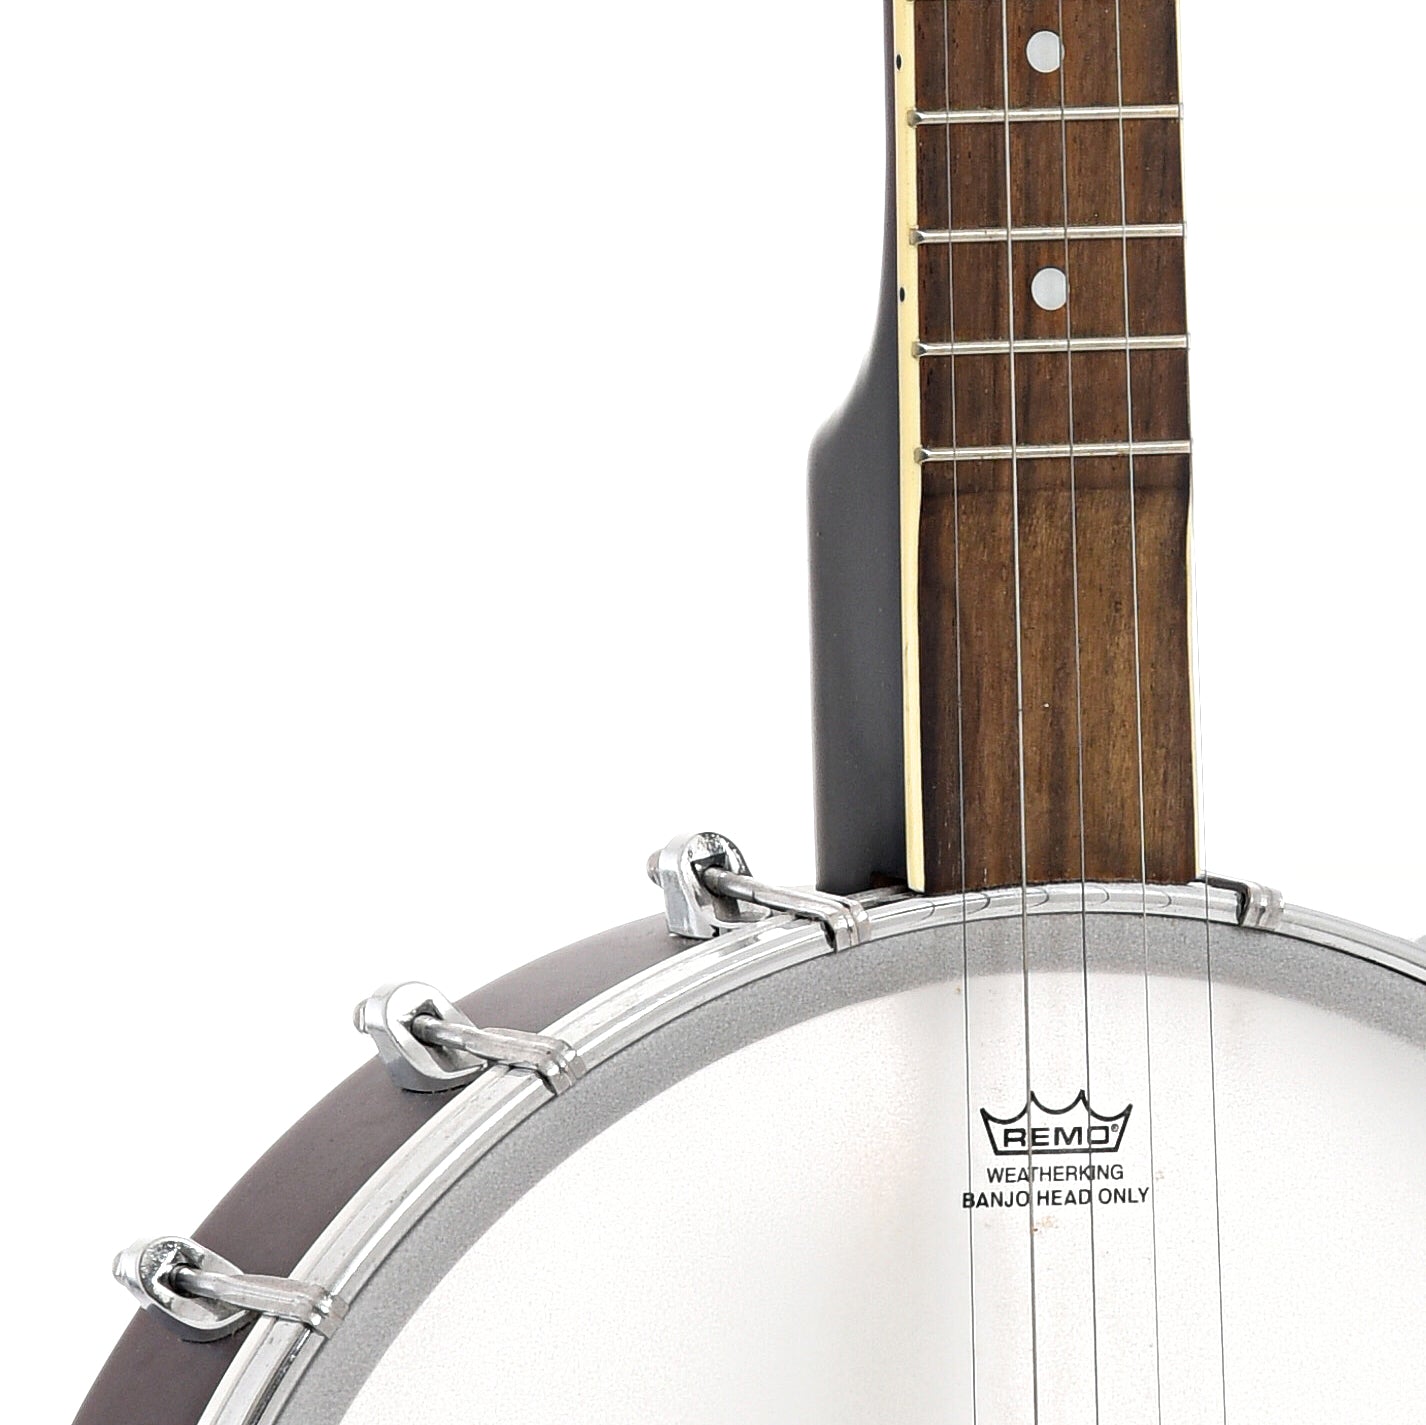 Front fretboard and body join of Washburn B-7 Open Back Banjo